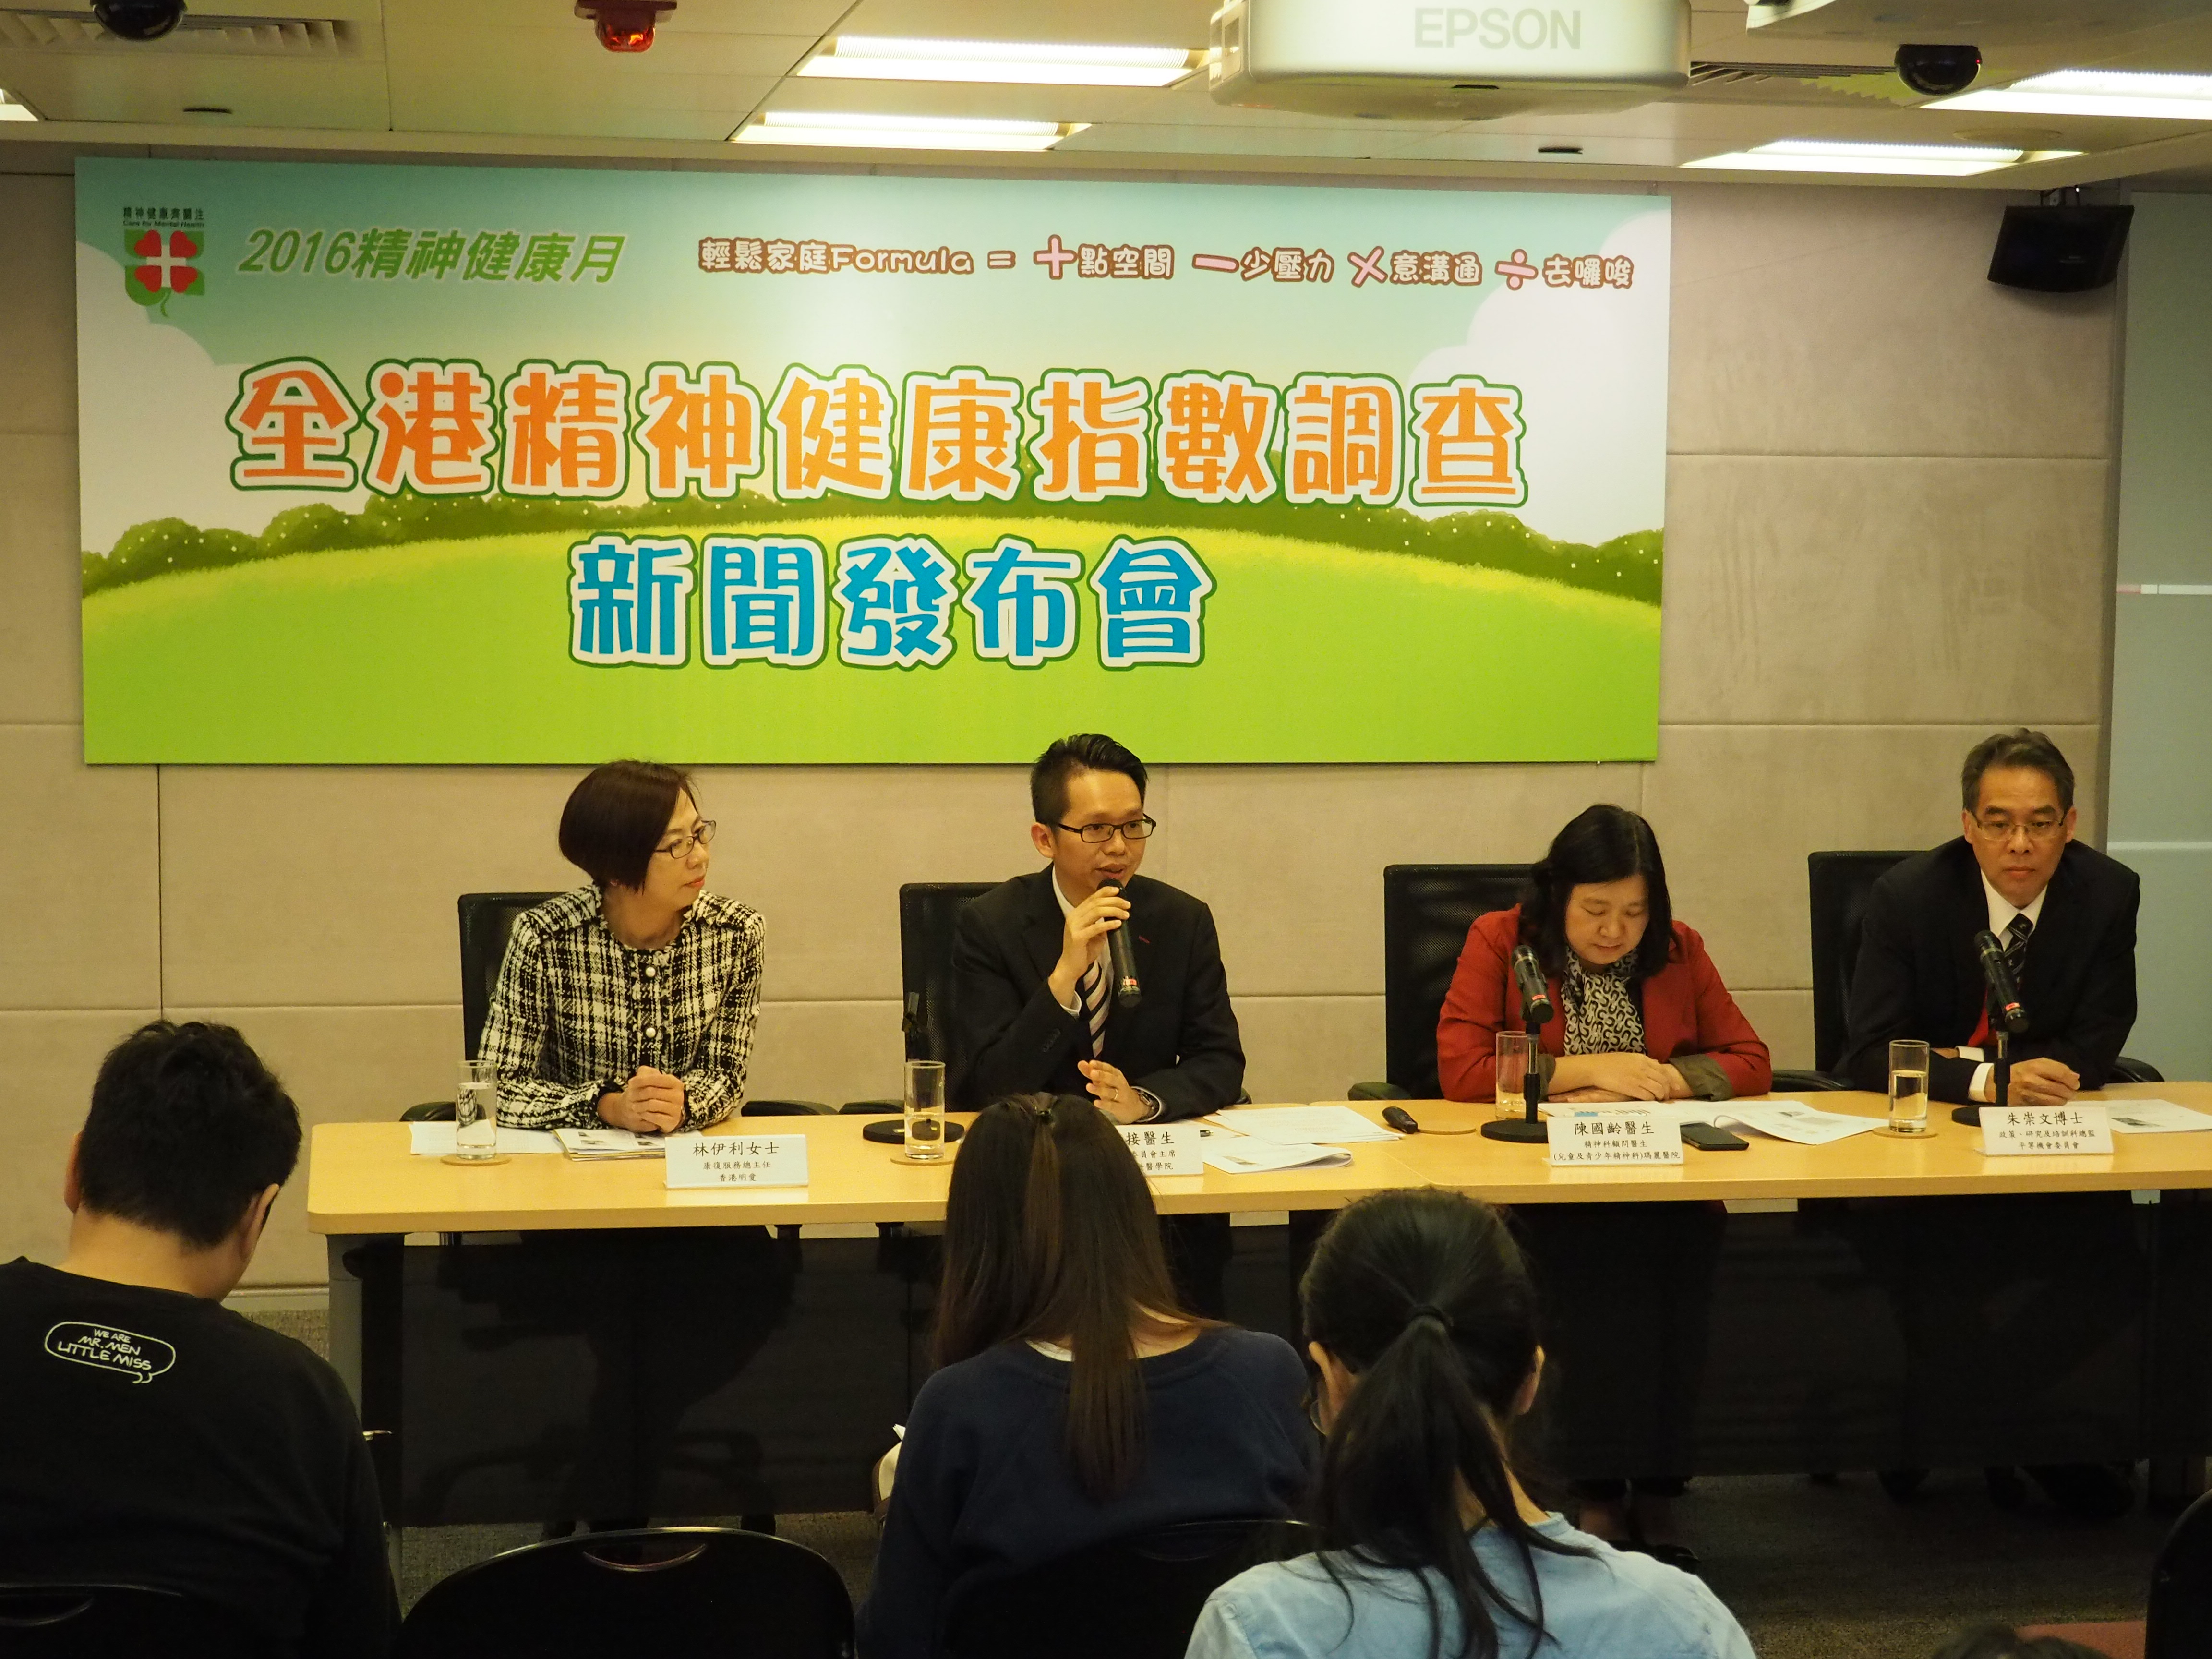 Representatives of the Organising Committee of Mental Health Month 2016 announce the results of the Hong Kong Mental Health Index Survey at a press conference in the EOC Office